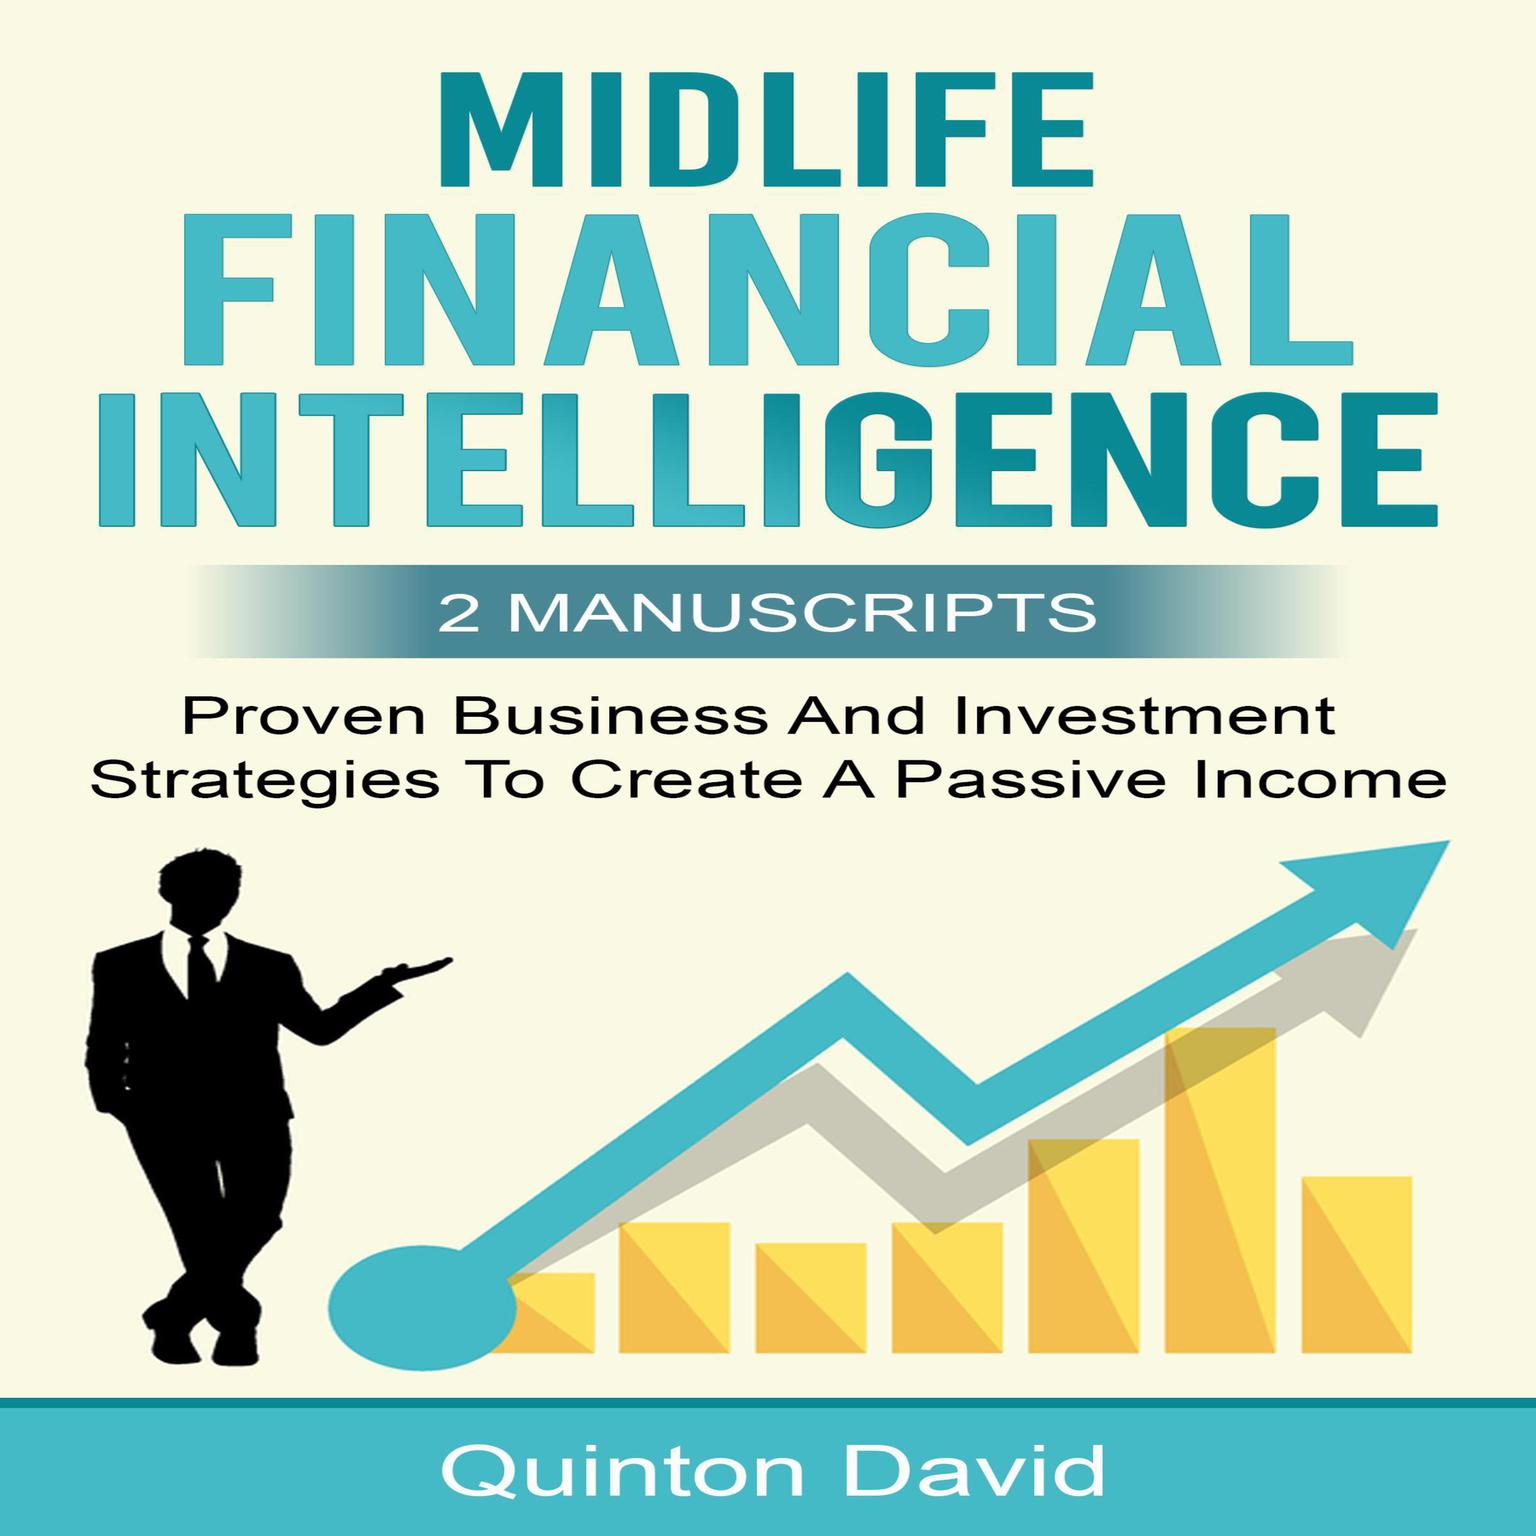 Midlife Financial Intelligence: Proven Business And Investment Strategies to Create Passive Income (2 Manuscripts) Audiobook, by Quinton David